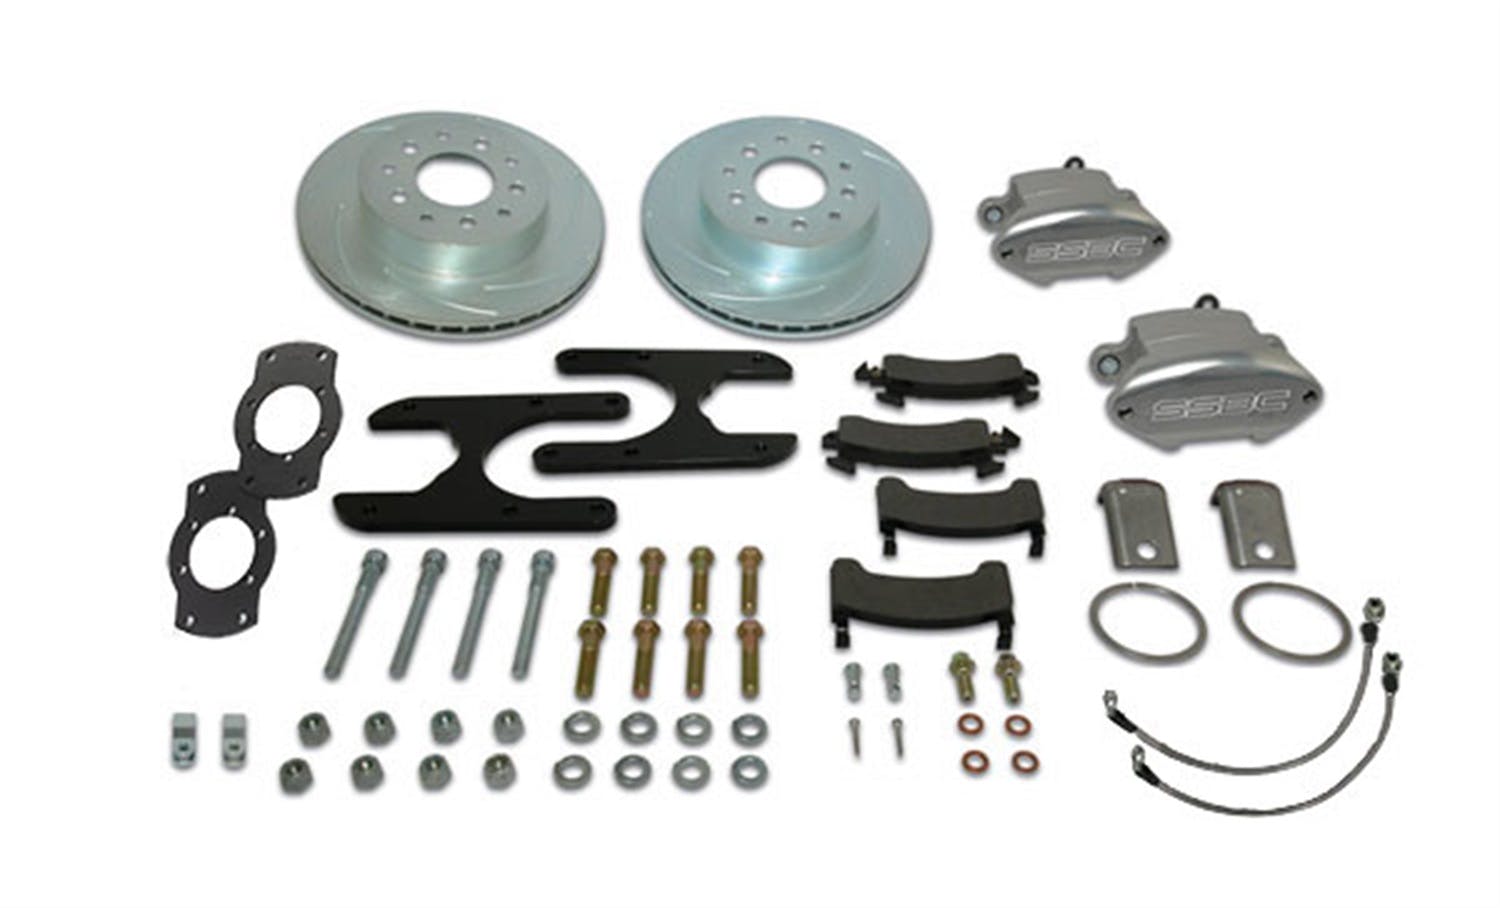 Stainless Steel Brakes A125-27R Kit A125-27 w/red calipers